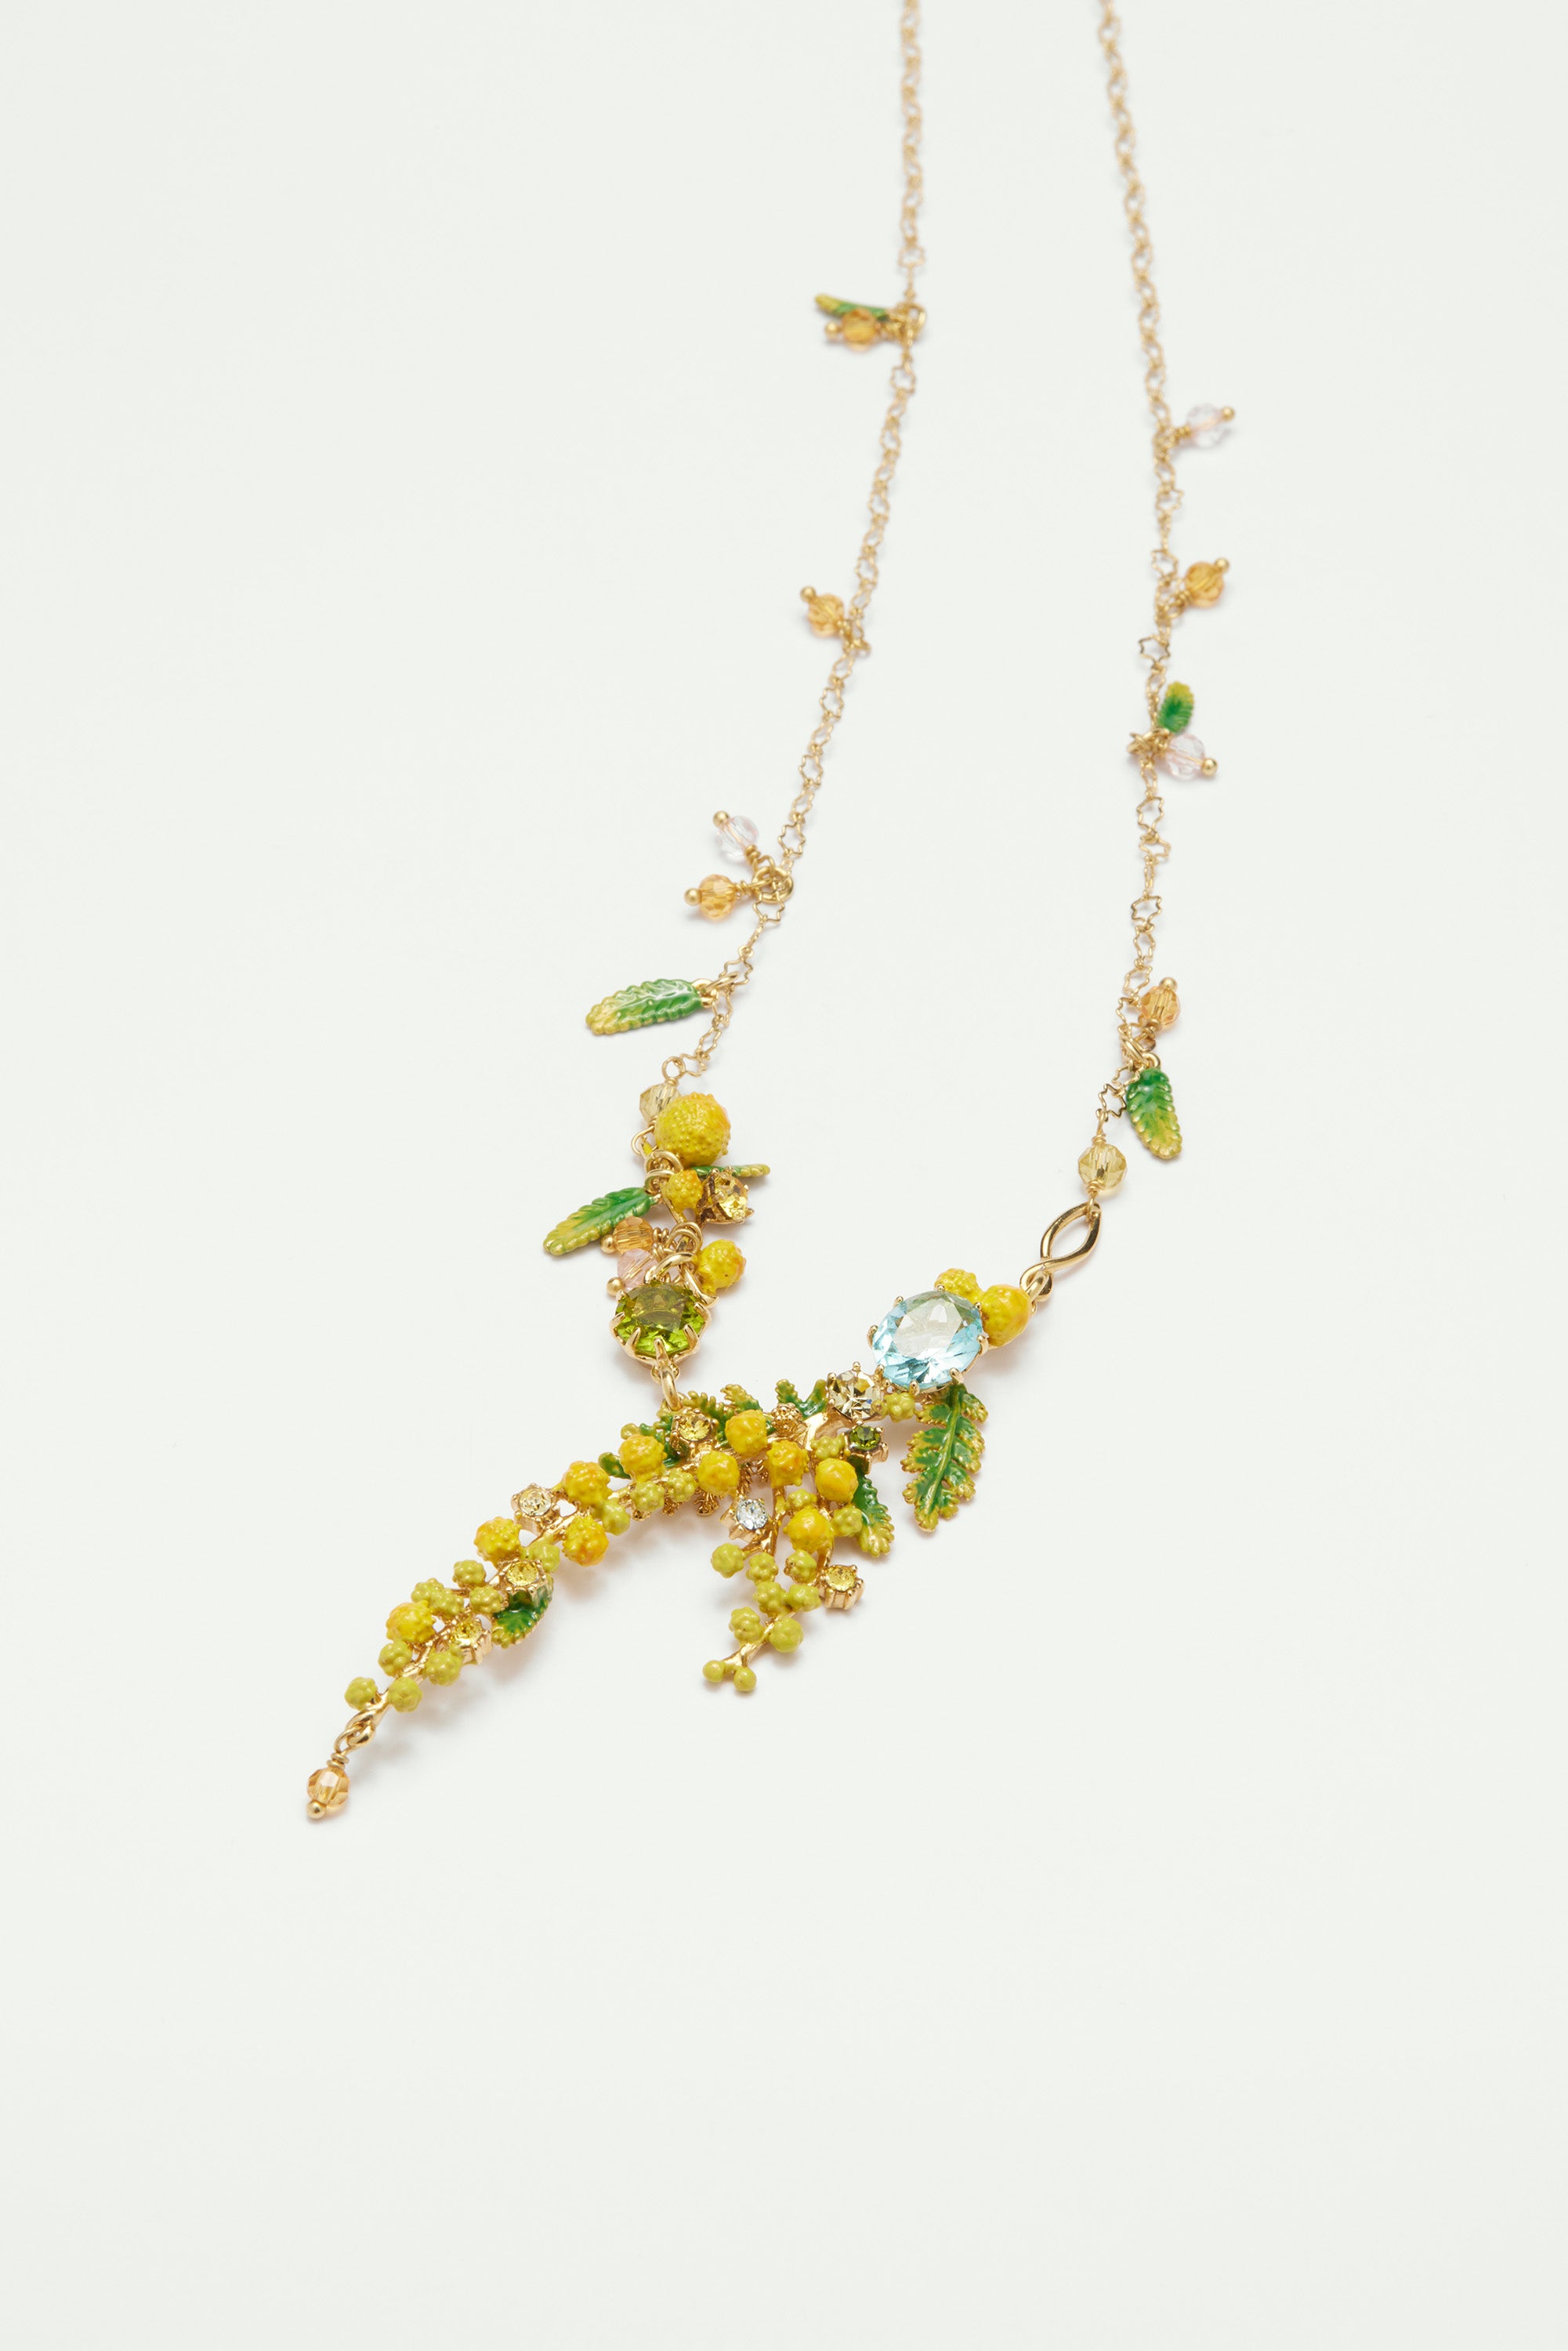 Mimosa's branch, fern and little leaves collar necklace